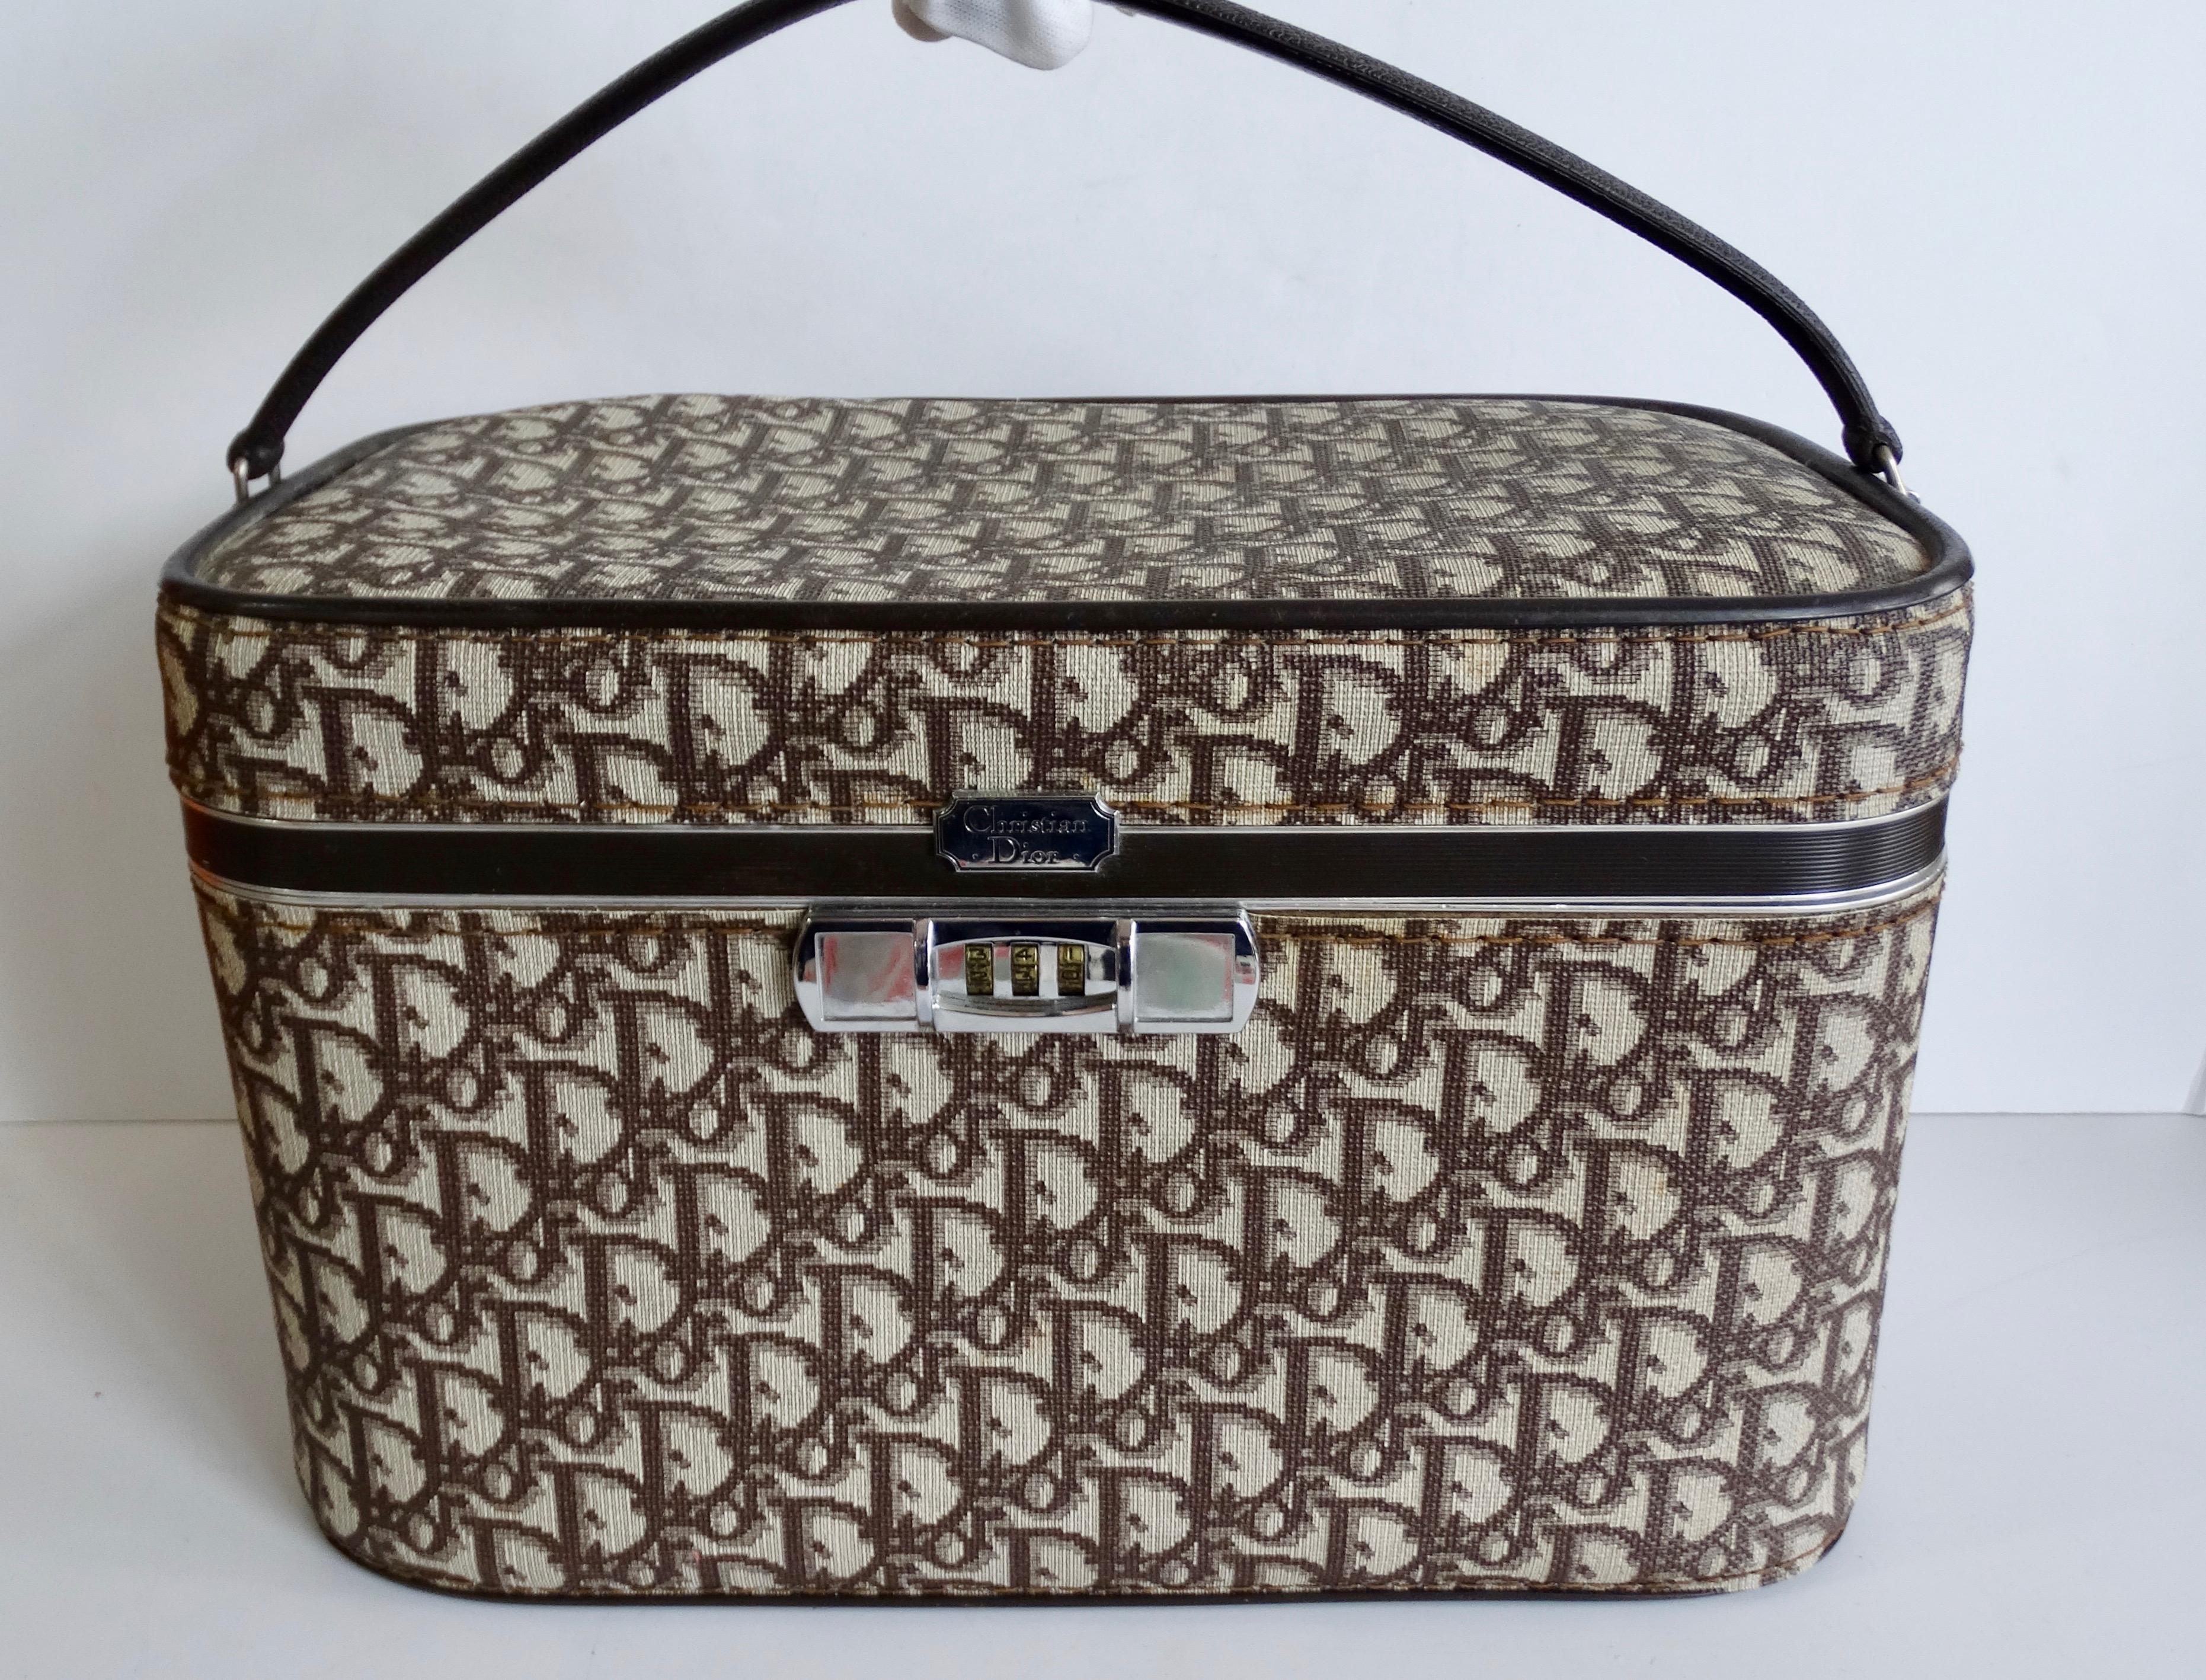 The logo mania trend of the 2000s is back- rock a piece of original 1970s monogram with our amazing Dior cosmetic case! Printed all over in Dior’s signature brown monogram print! Boxy, cosmetic case construction with stylish top handle. Features